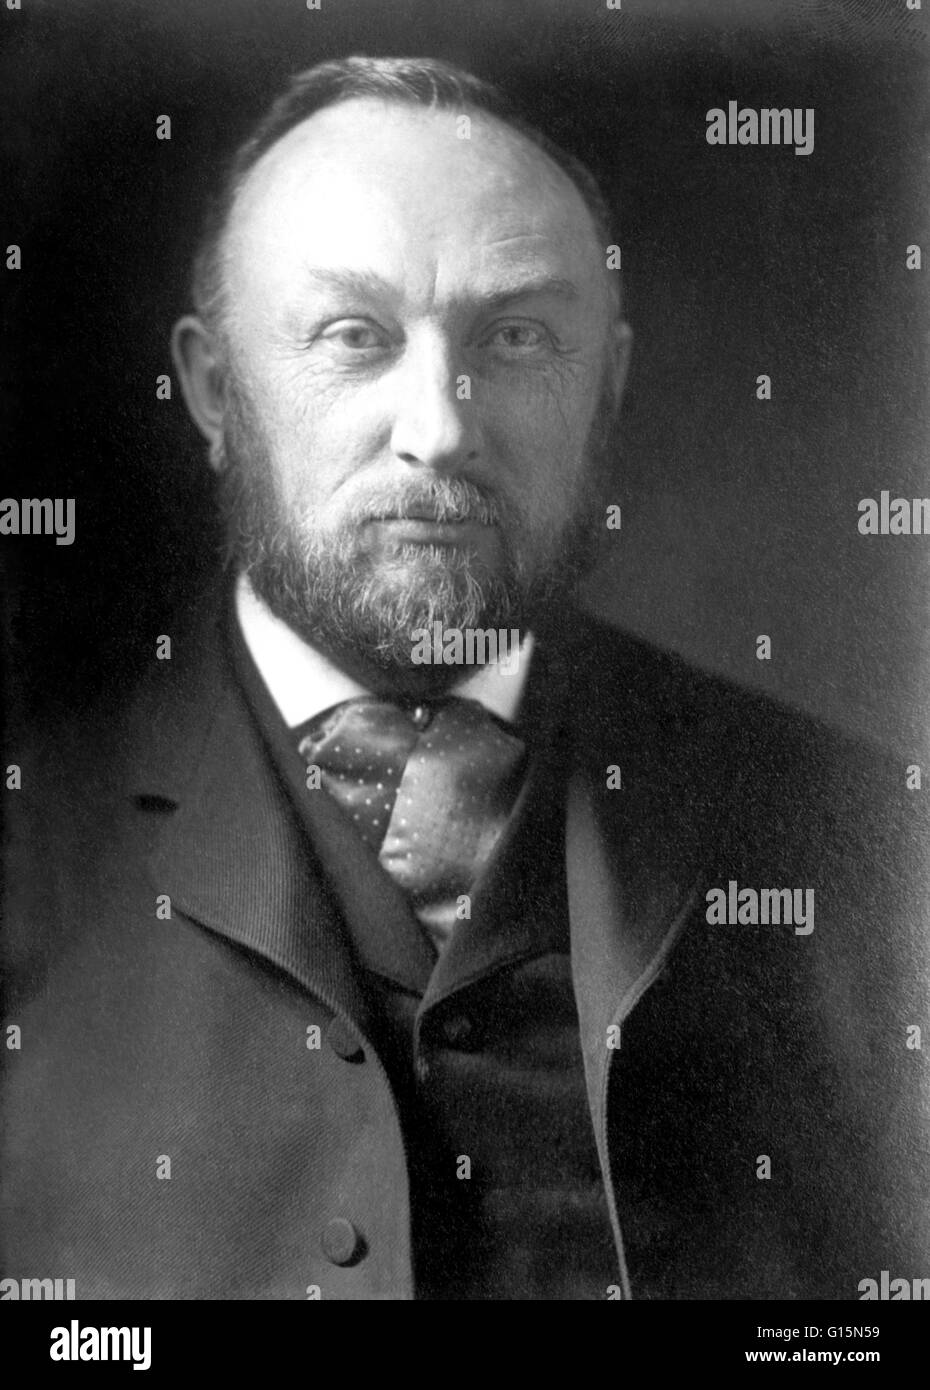 Edward Charles Pickering (July 19, 1846 - February 3, 1919) was an American astronomer and physicist. He taught physics at the Massachusetts Institute of Technology. With Carl Vogel, he discovered the first spectroscopic binary stars. A binary star is a s Stock Photo